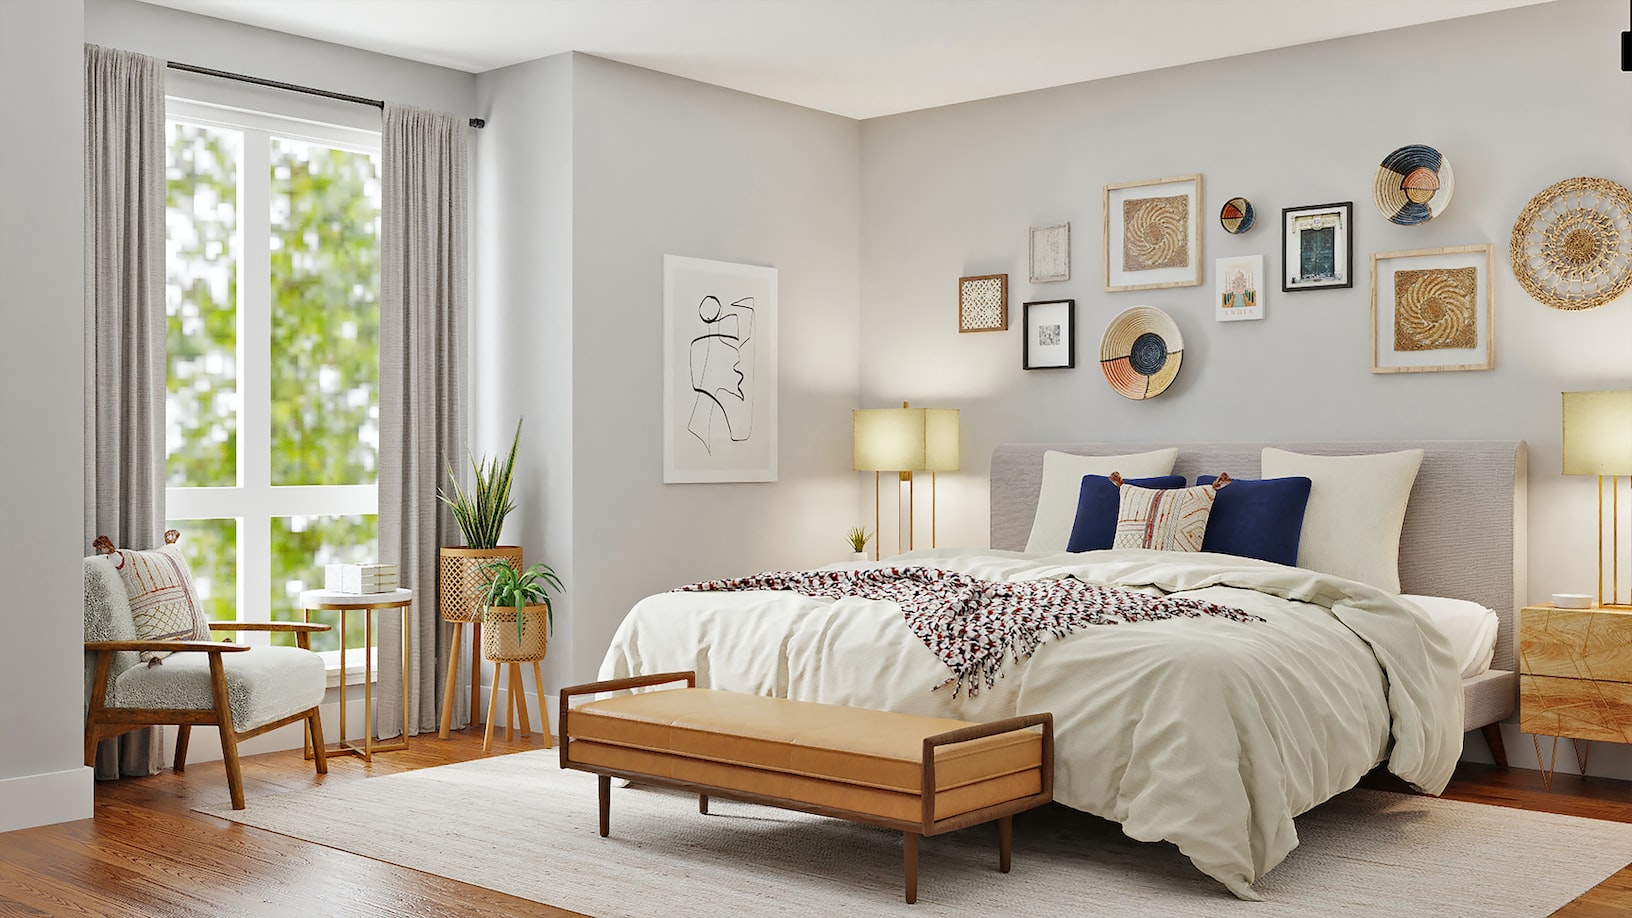  Colour Trends for Bedroom Interiors 2022 